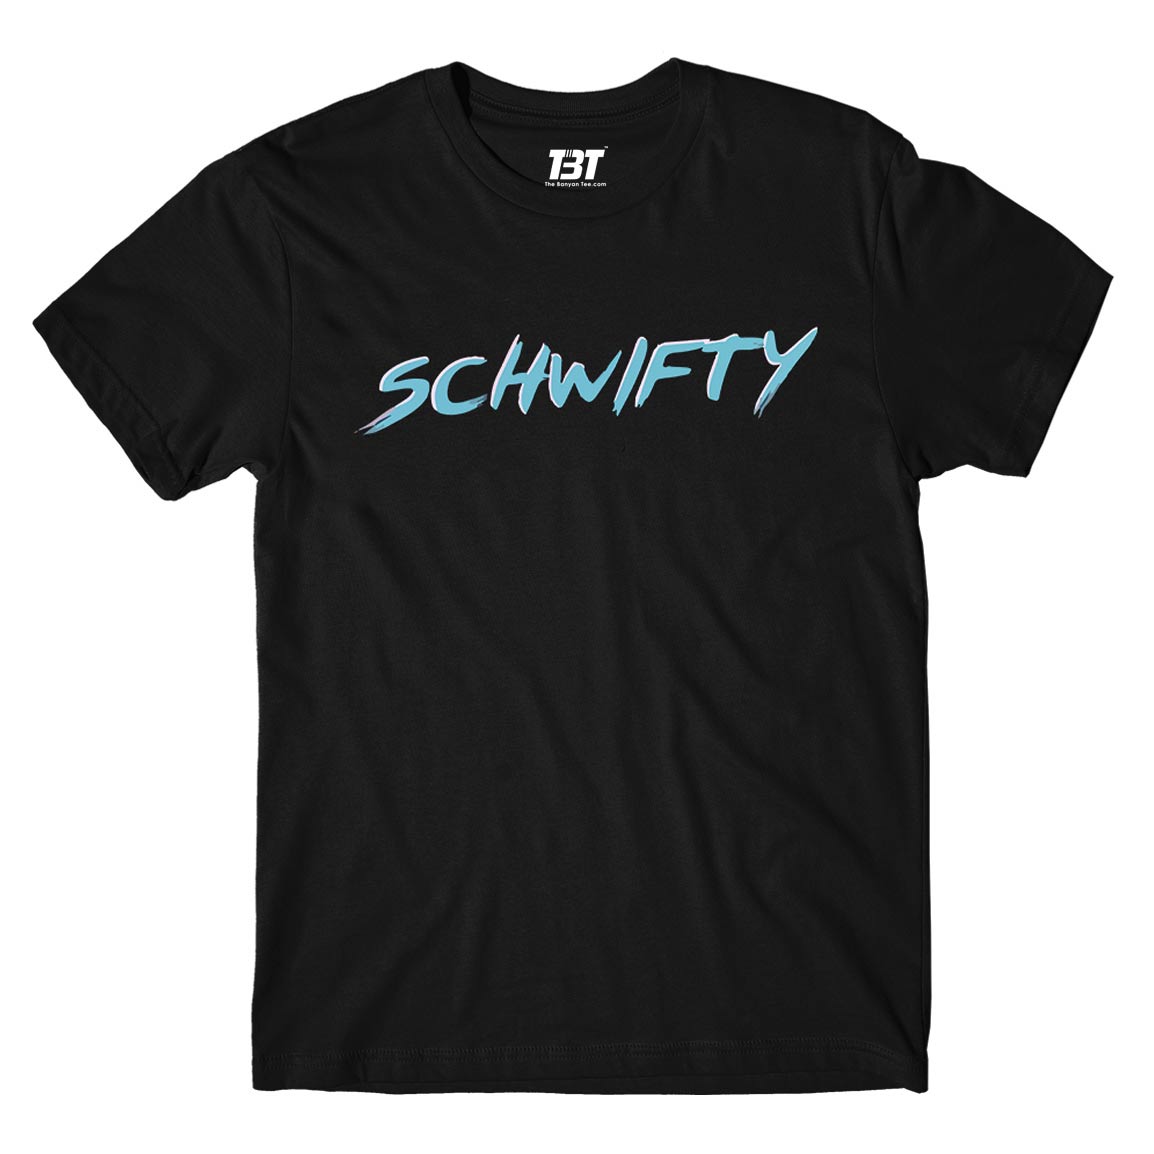 rick and morty schwifty t-shirt buy online united states usa the banyan tee tbt men women girls boys unisex black rick and morty online summer beth mr meeseeks jerry quote vector art clothing accessories merchandise